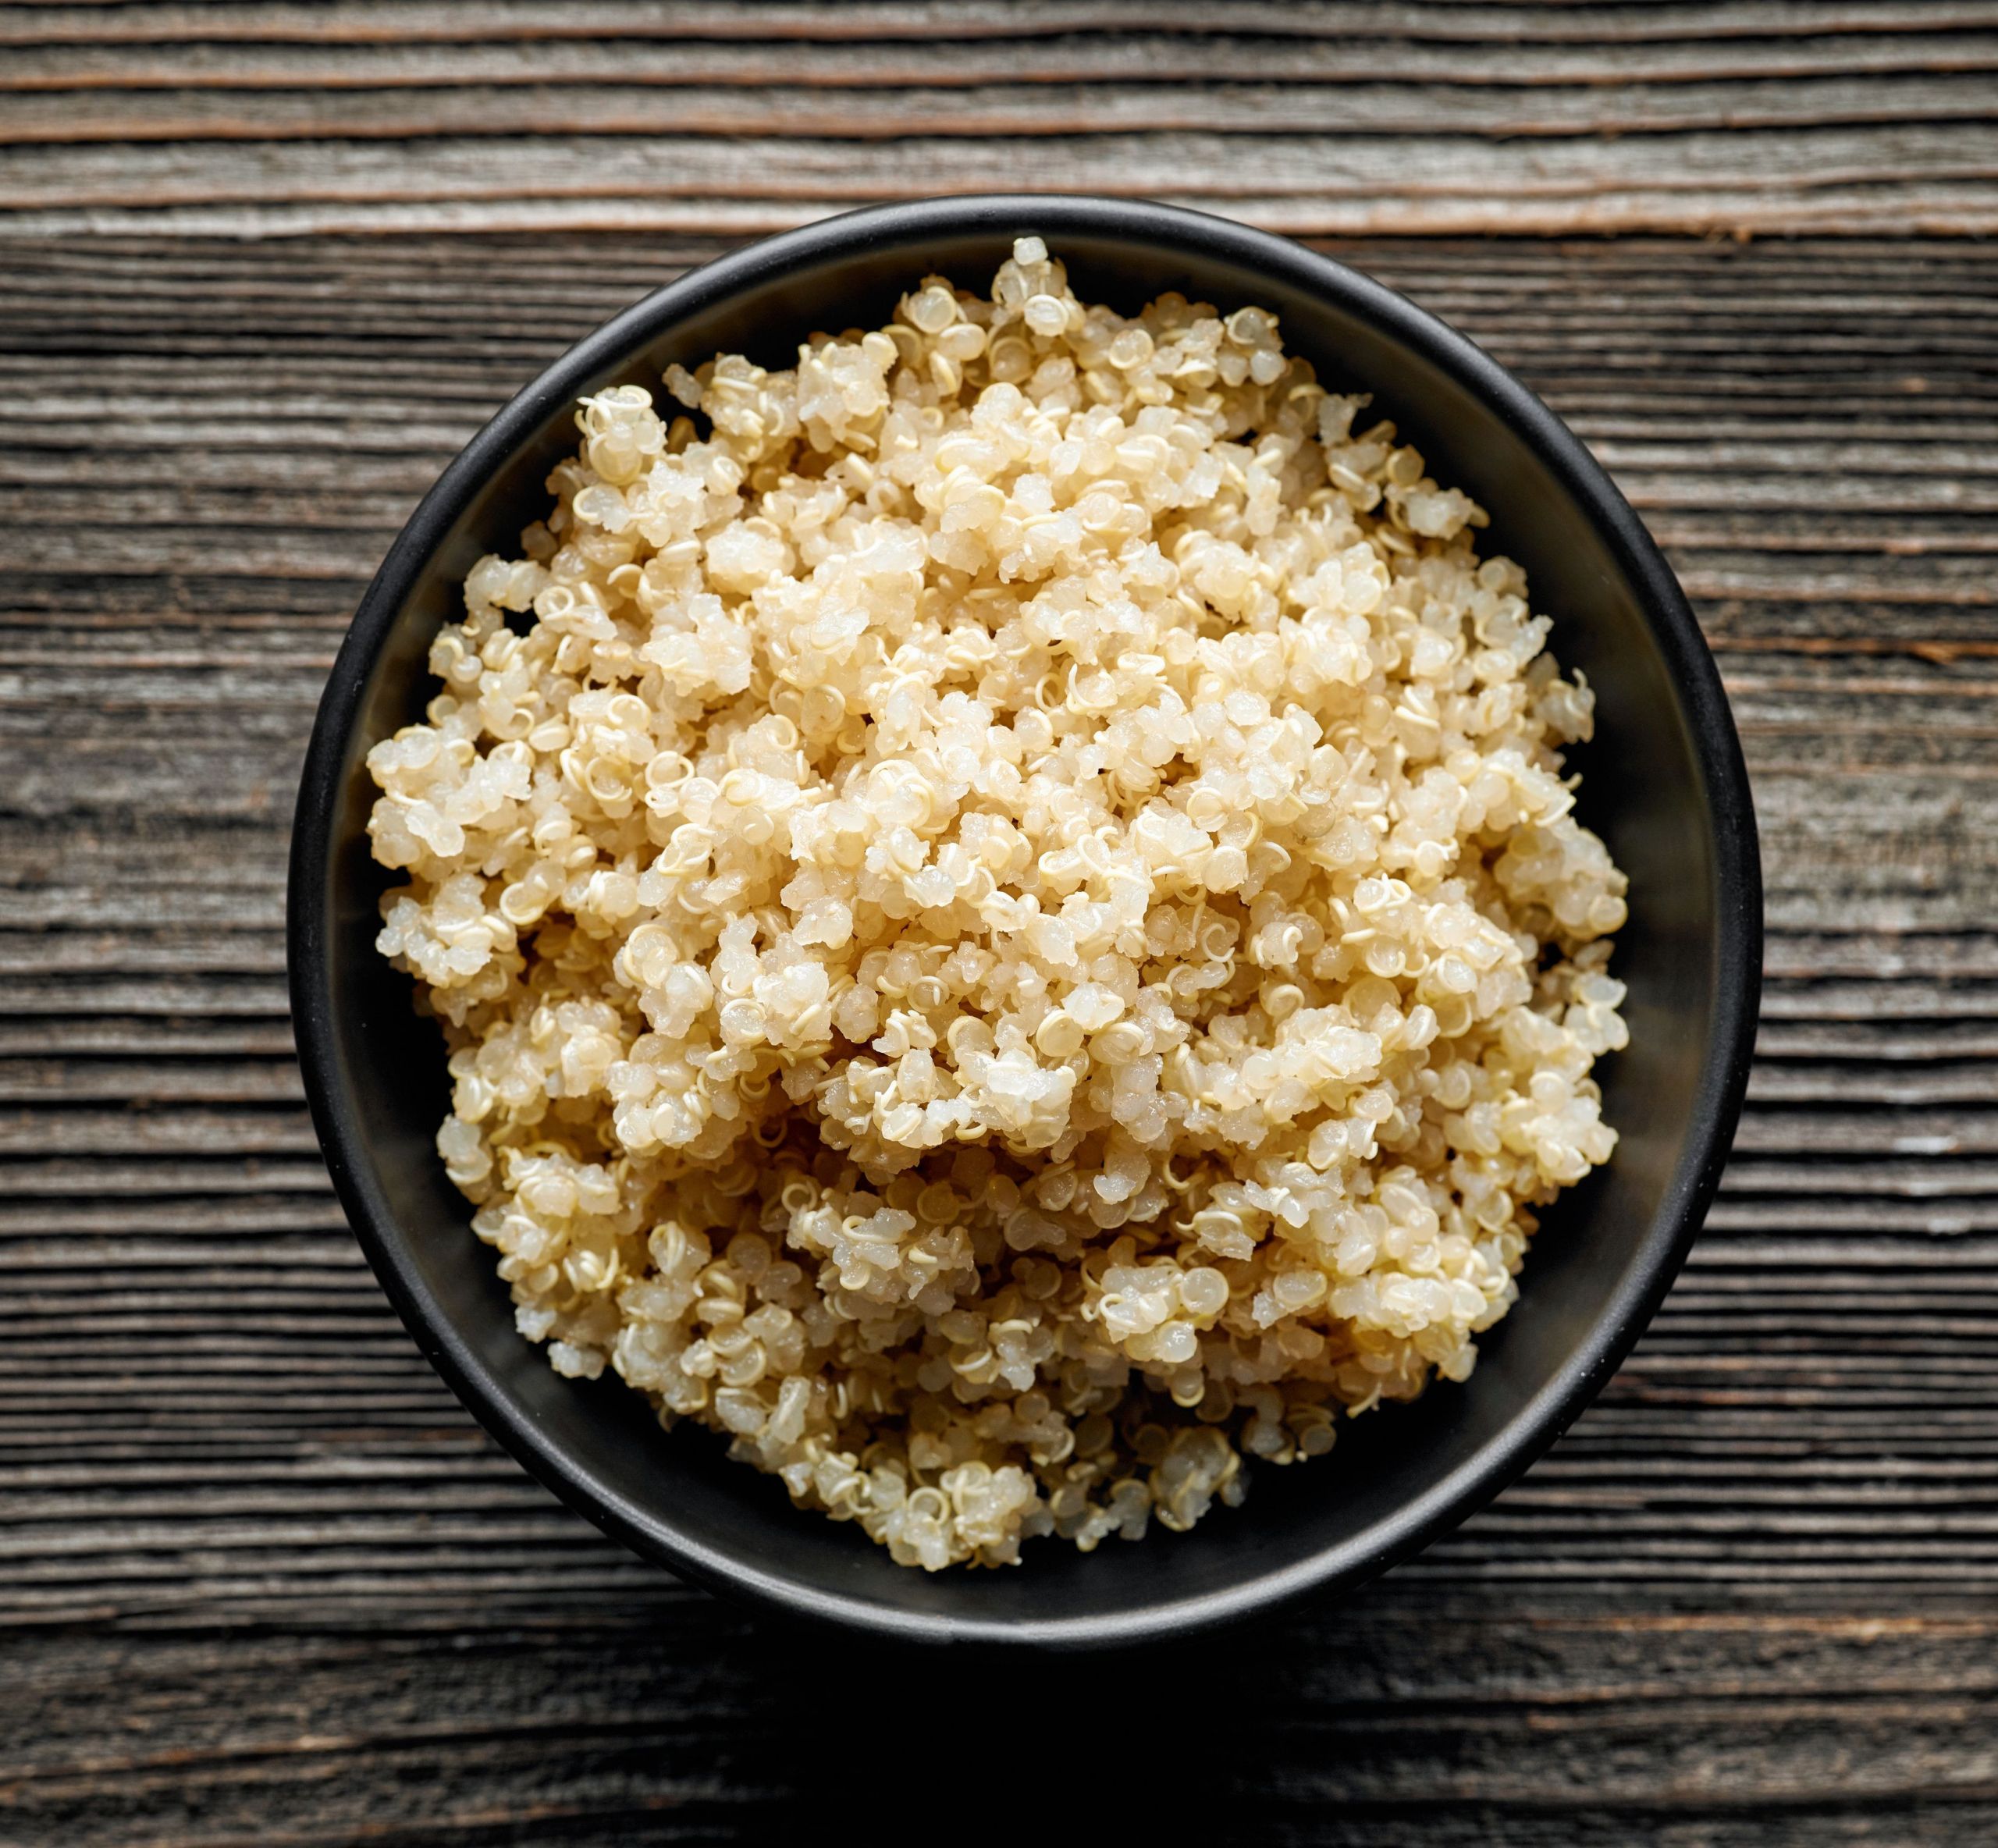 Quinoa Whole Grain
 11 Types of Whole Grains and Their Uses